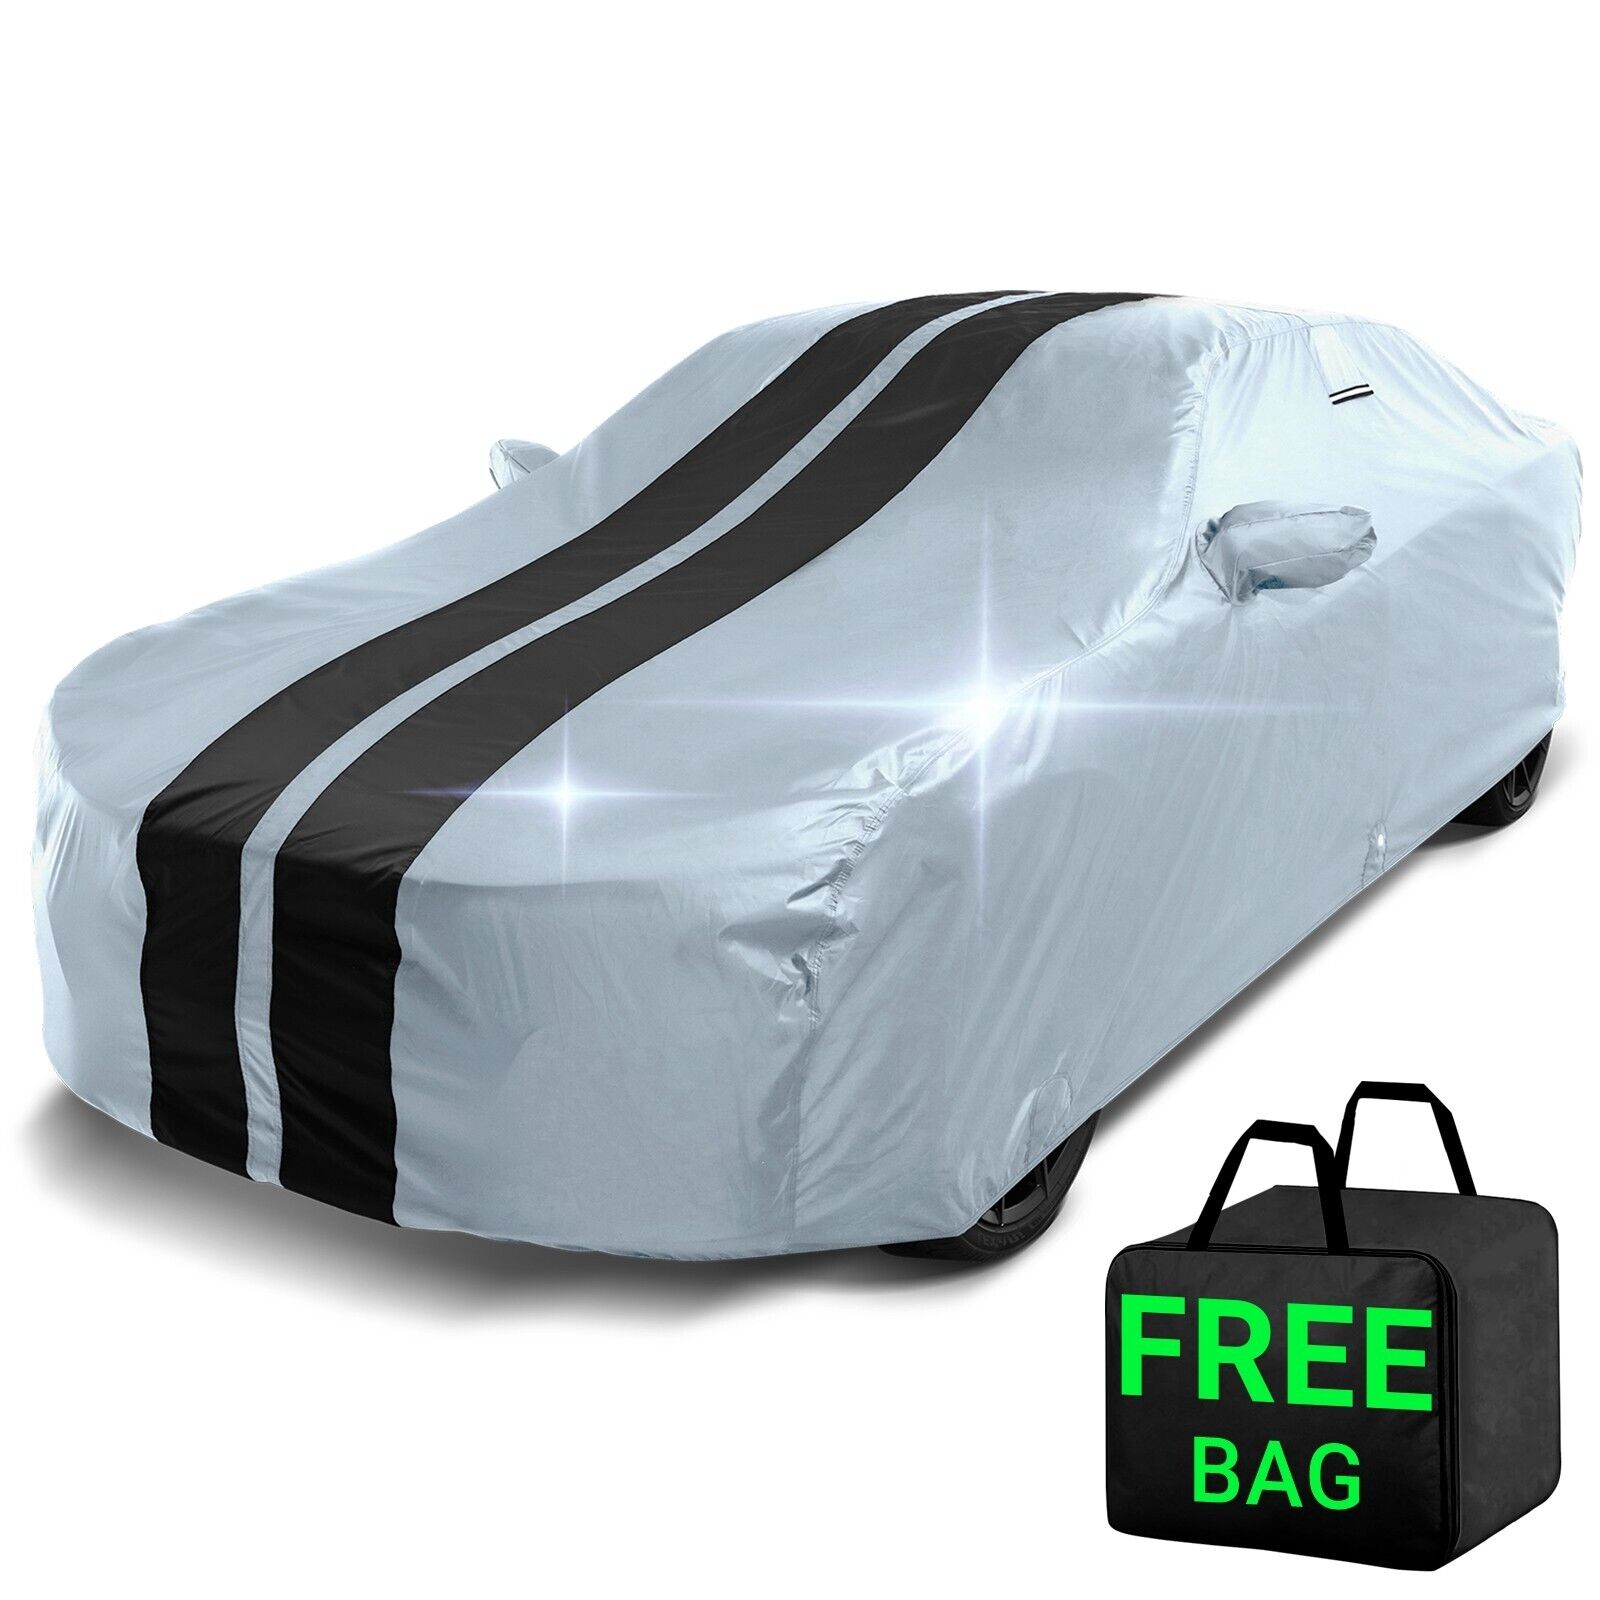 1982-1988 Cadillac Cimarron Custom Car Cover - All-Weather Waterproof Protection